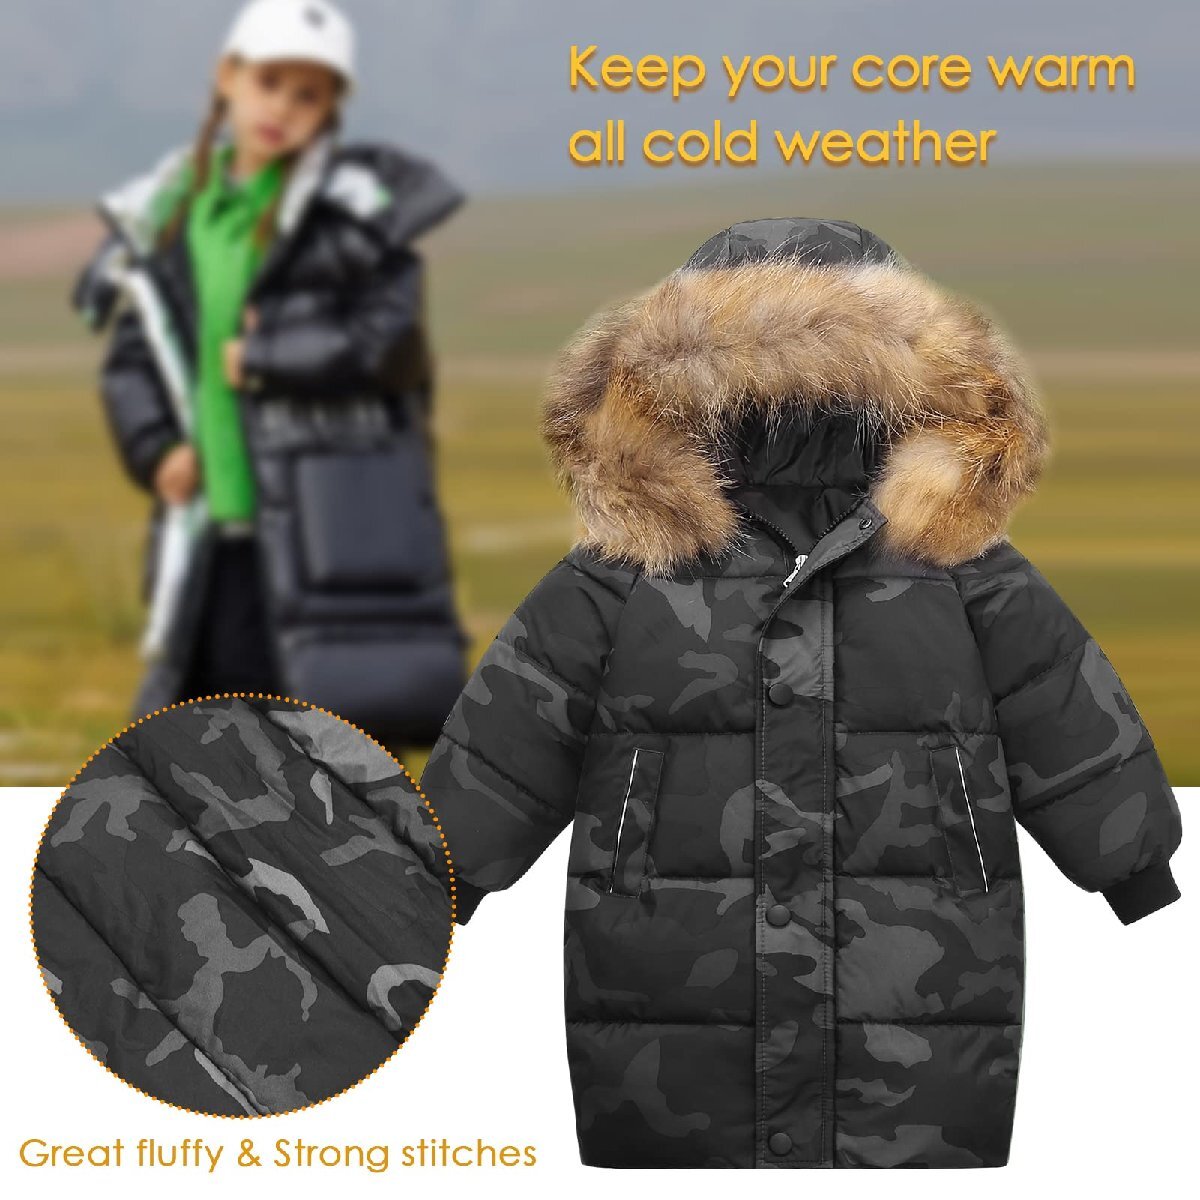 [Panegy] Kids coat child clothes man down jacket girl outer child long height with a hood . pretty commuting to kindergarten going to school outing ka